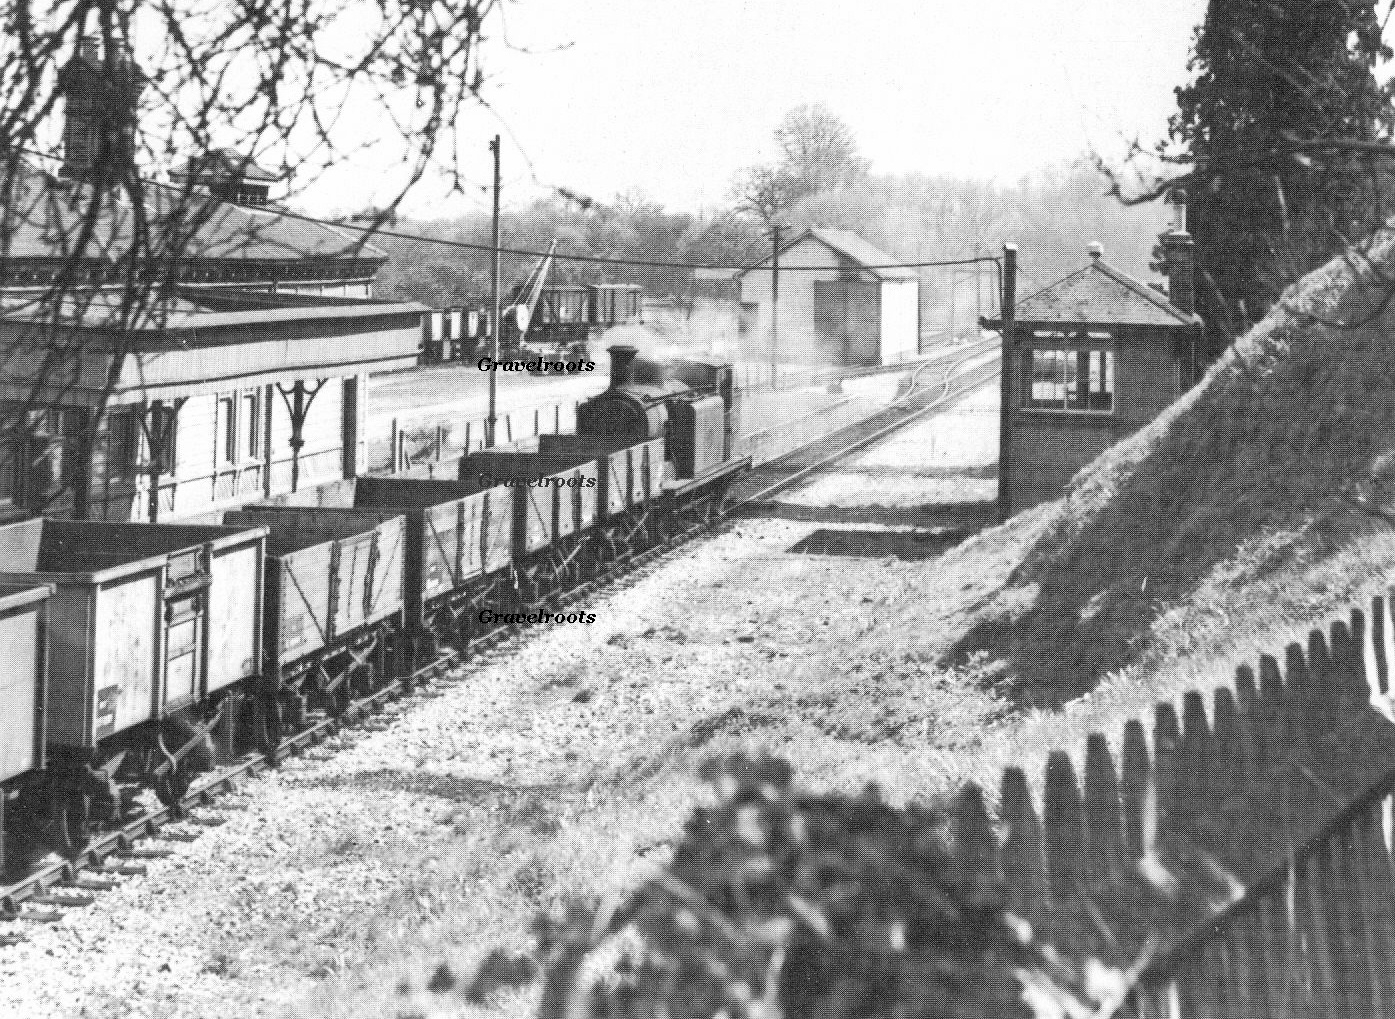 Old photos of Petworth Station - further image below